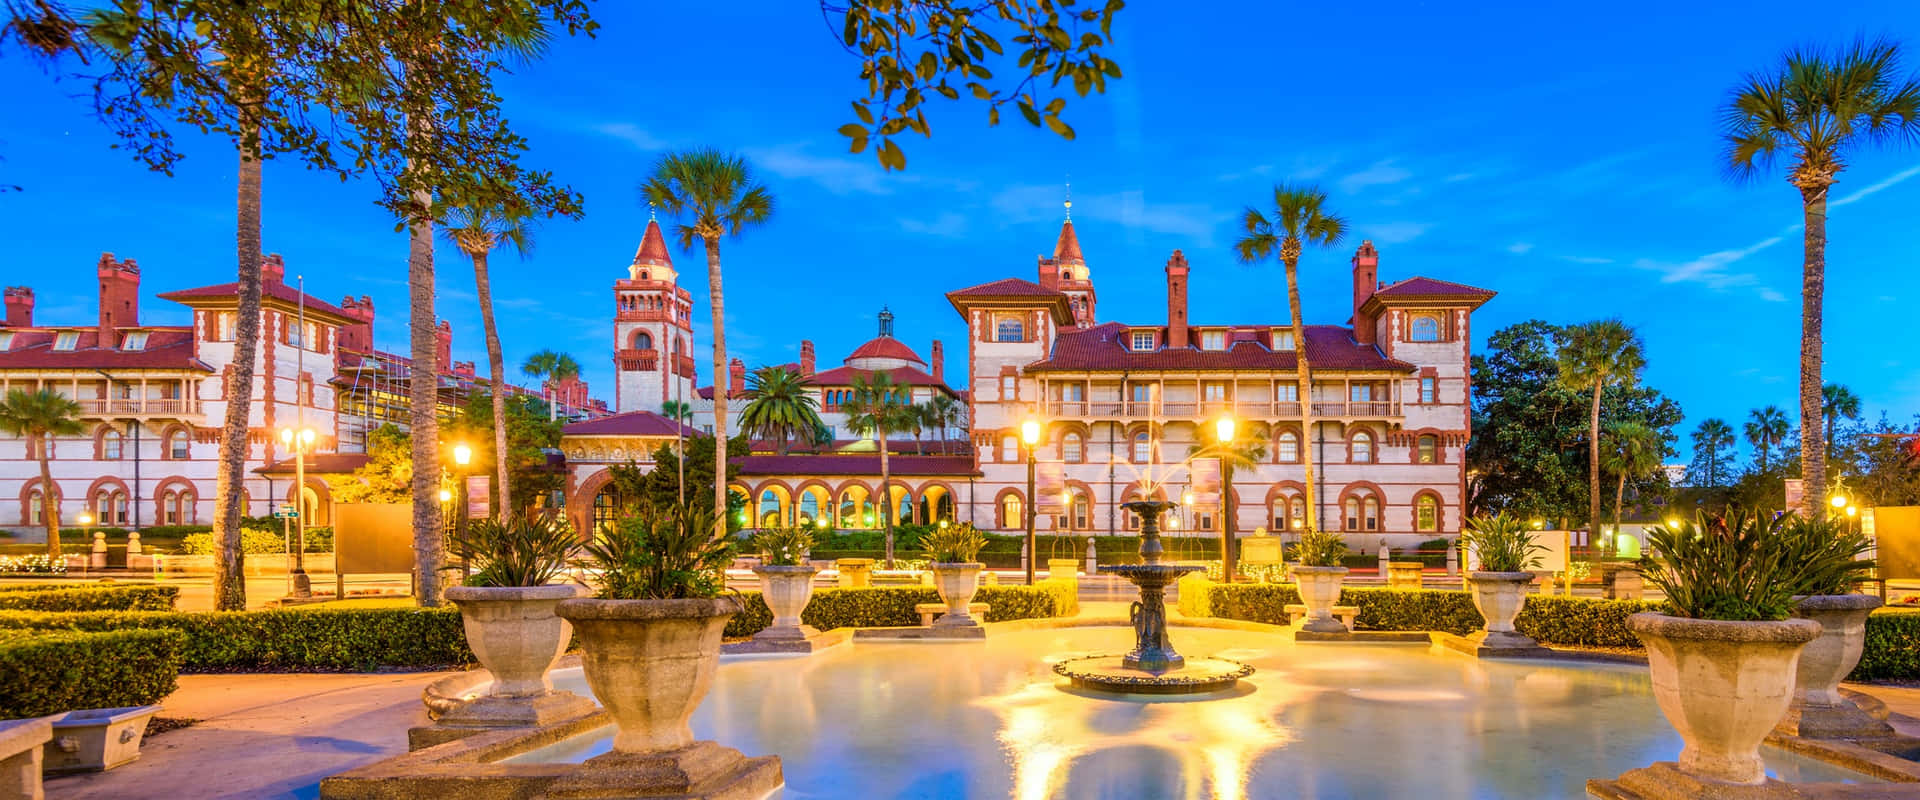 St Augustine Florida Pictures Wallpaper